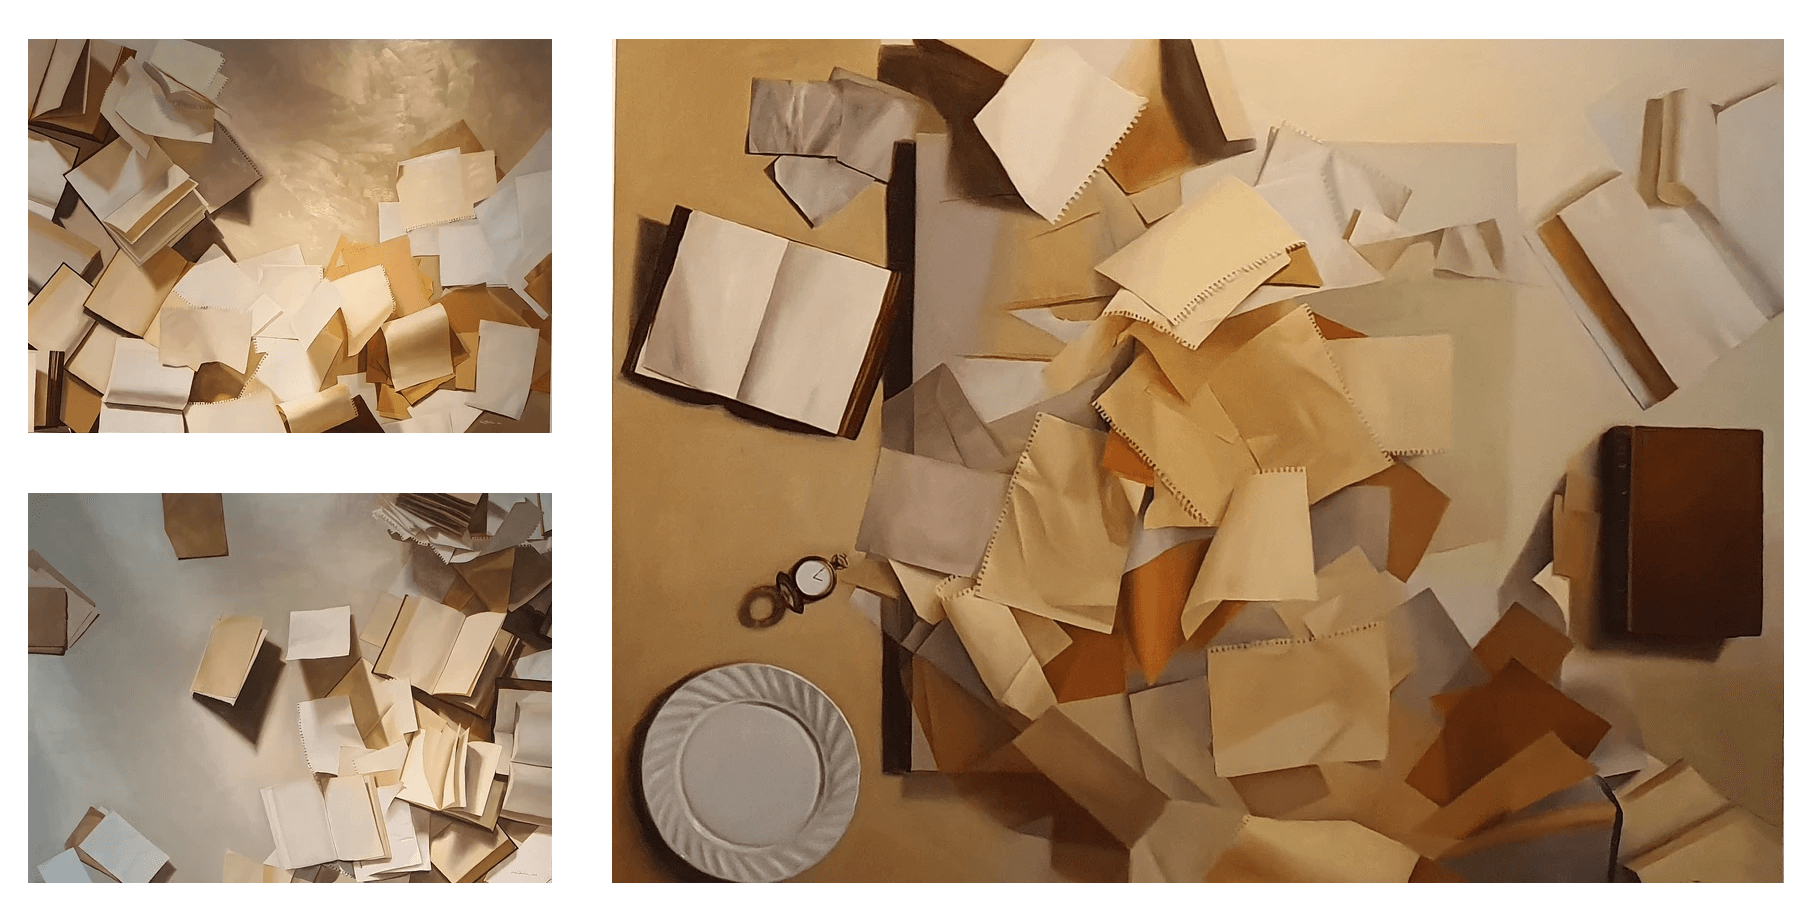 Chelsea Theodossis' art. With a calm and disciplined approach, Theodossis paints collections of books and loose pages, all blank and unwritten, symbolizing the many people whose stories she hopes were written, shared, or at least heard. 